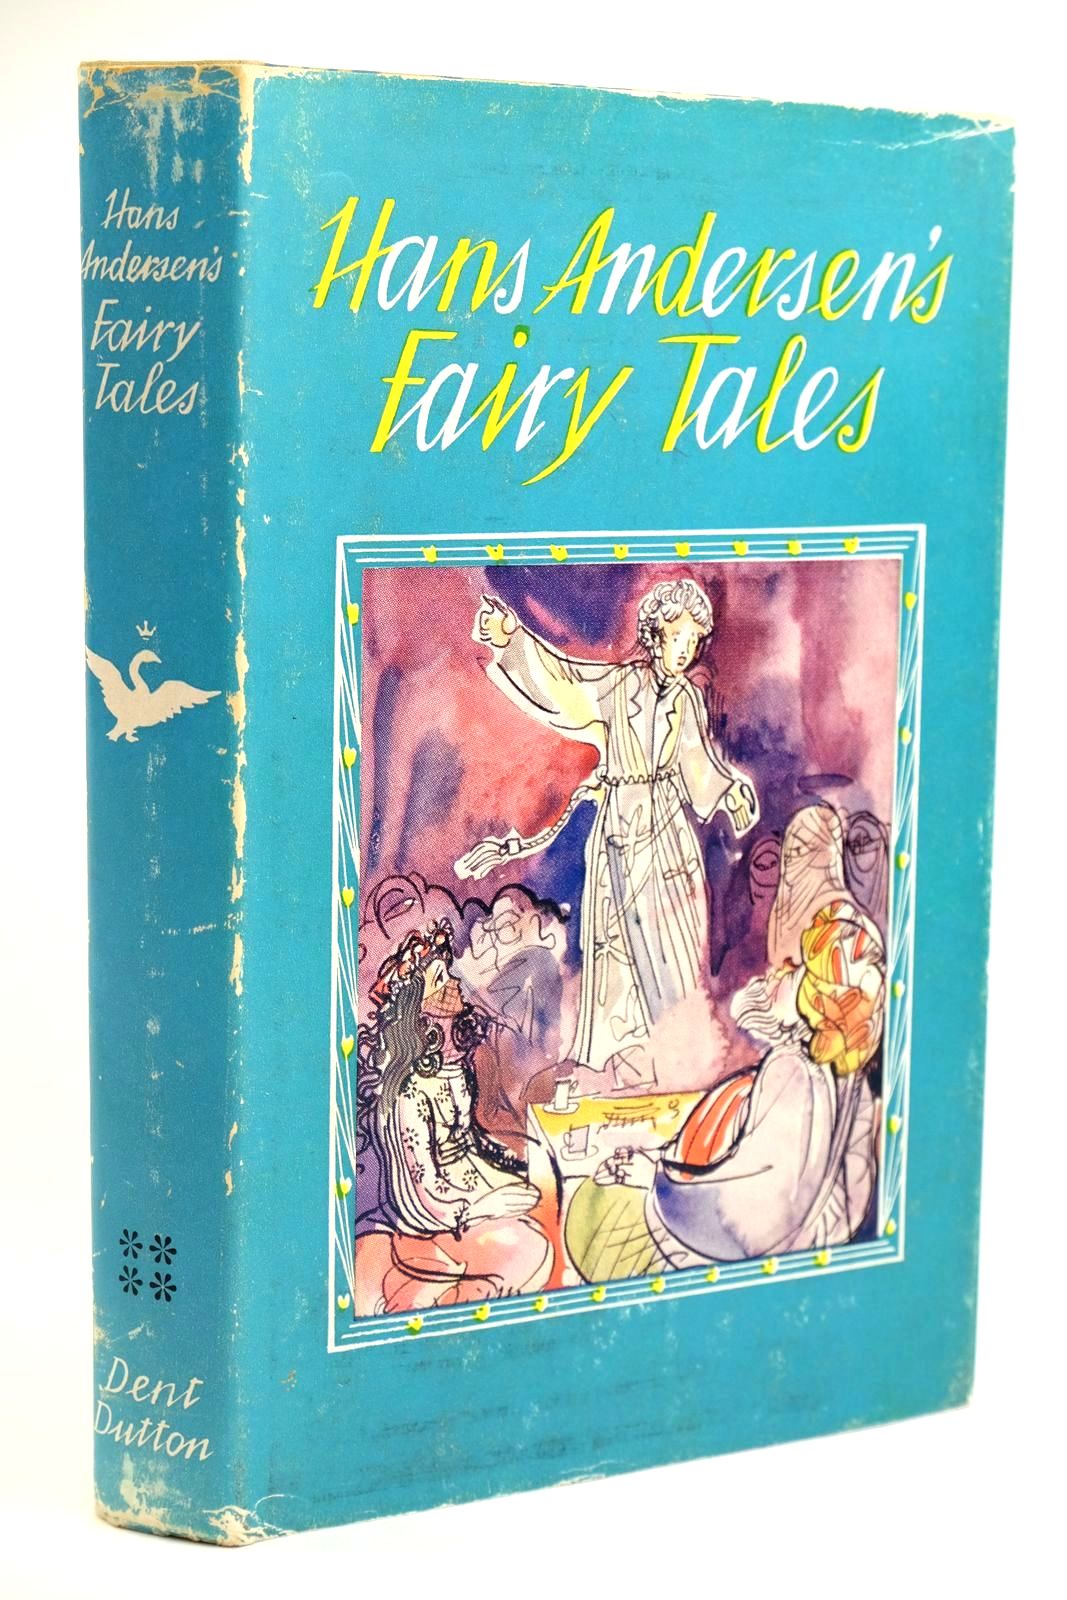 Photo of HANS ANDERSEN'S FAIRY TALES written by Spink, Reginald Andersen, Hans Christian illustrated by Baumhauer, H. published by J.M. Dent &amp; Sons Ltd. (STOCK CODE: 1319182)  for sale by Stella & Rose's Books